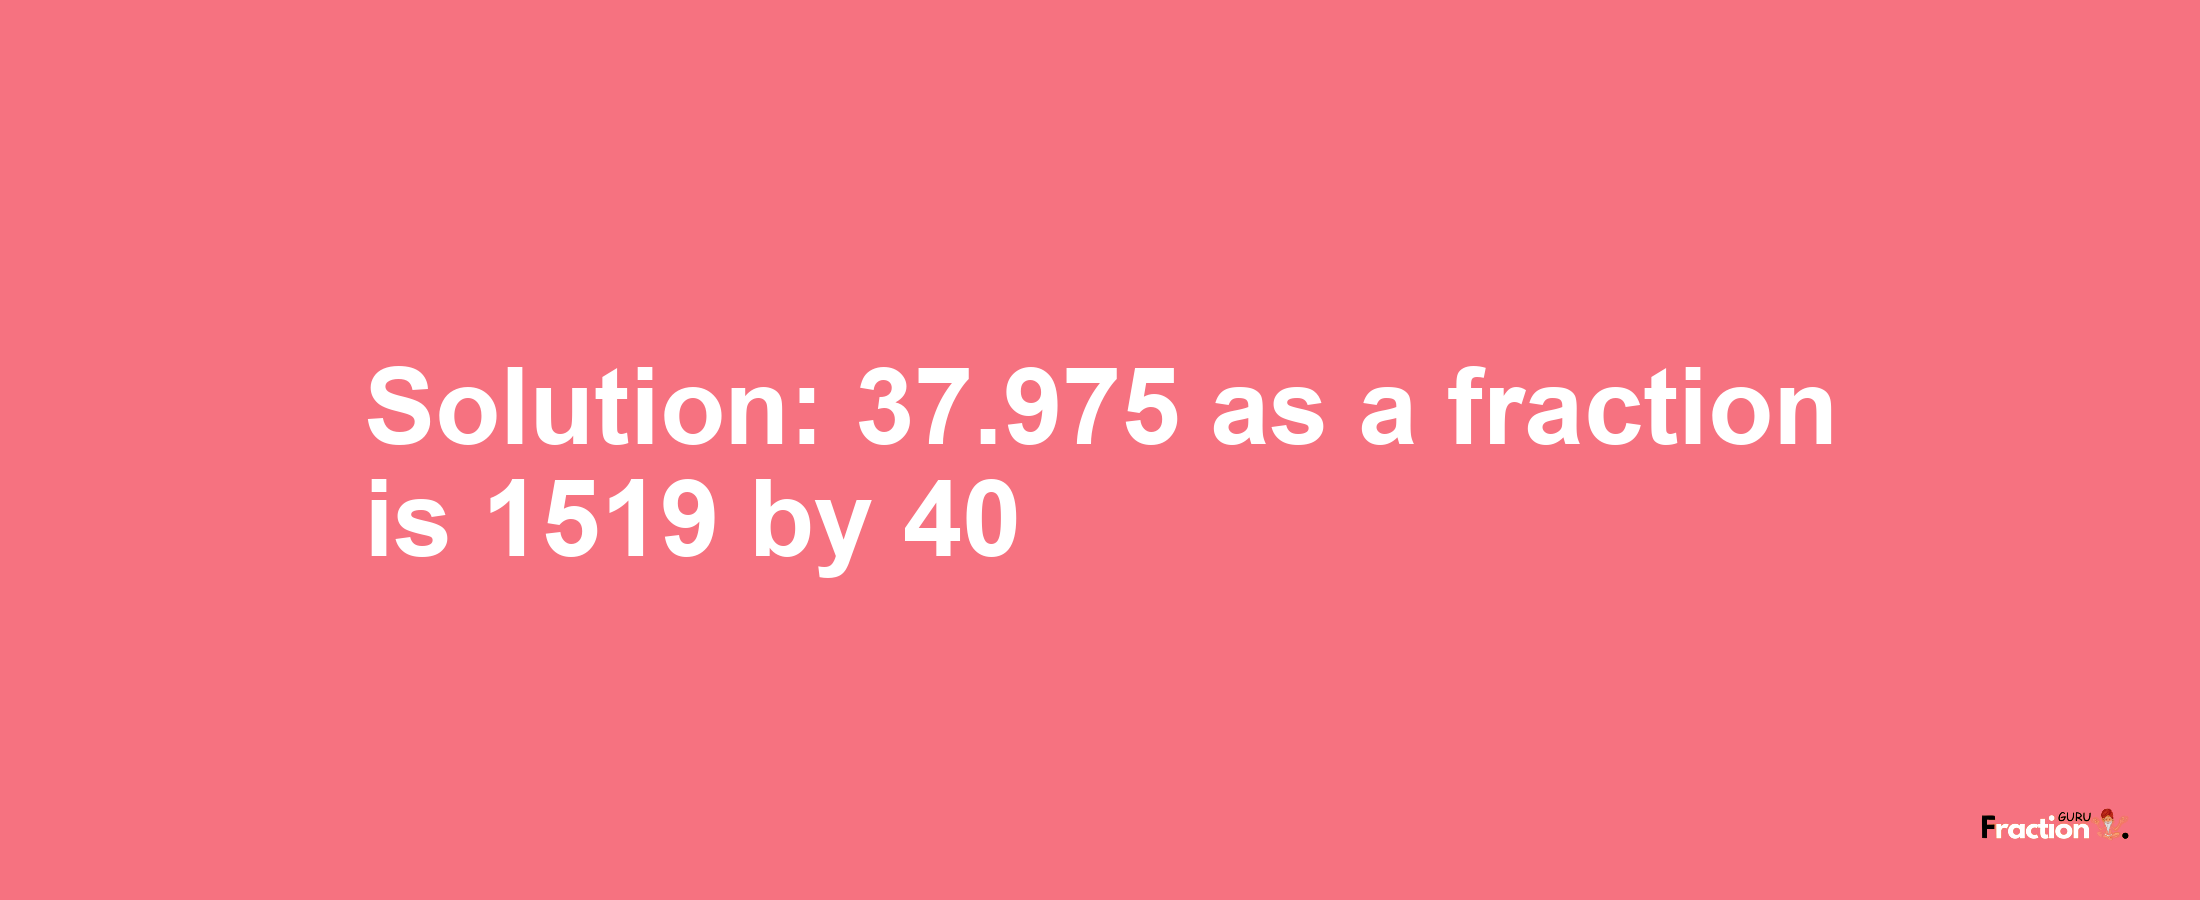 Solution:37.975 as a fraction is 1519/40